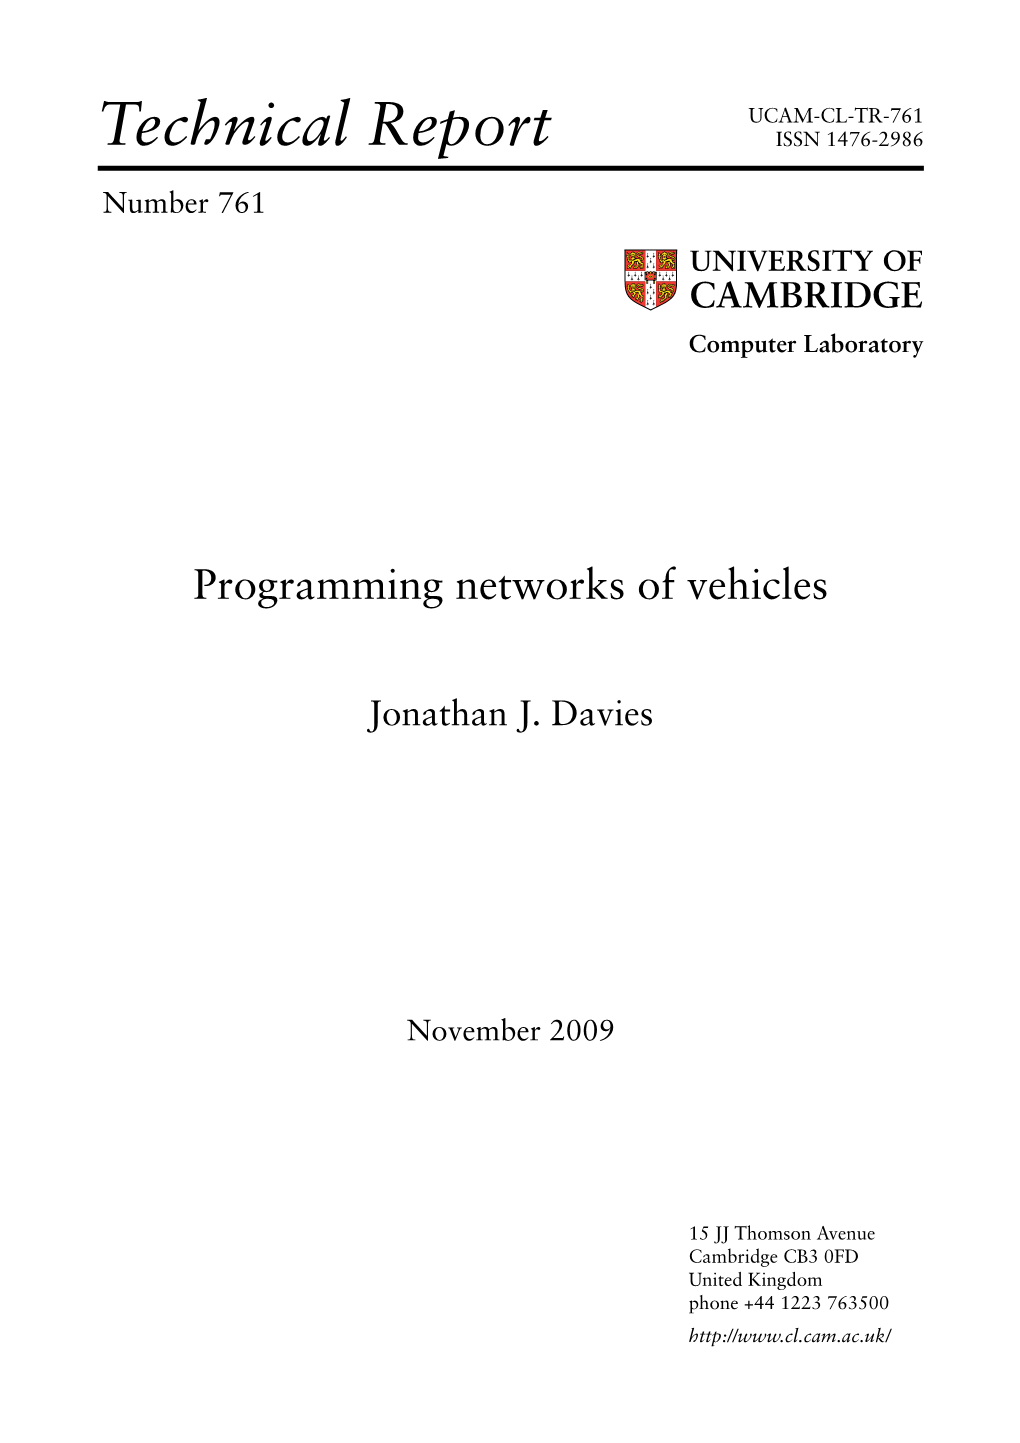 Programming Networks of Vehicles